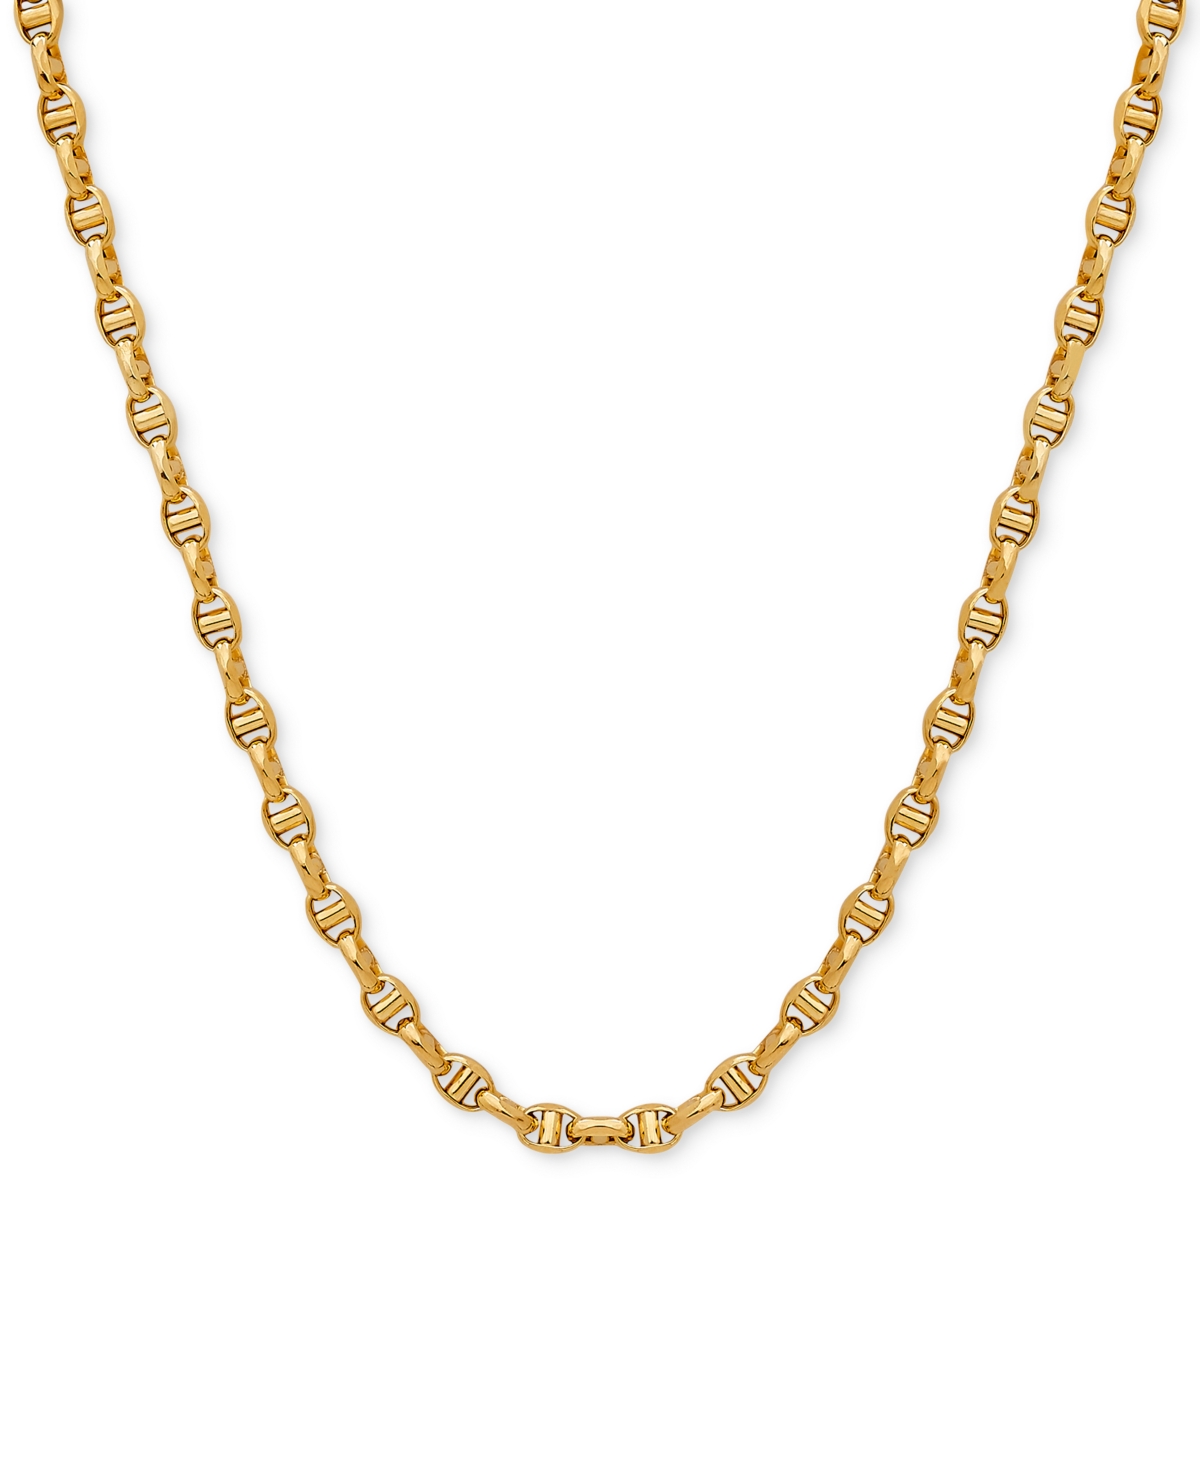 22" Italian Gold Anchor Link Chain (4-1/2mm) in 10k Gold - Yellow Gold